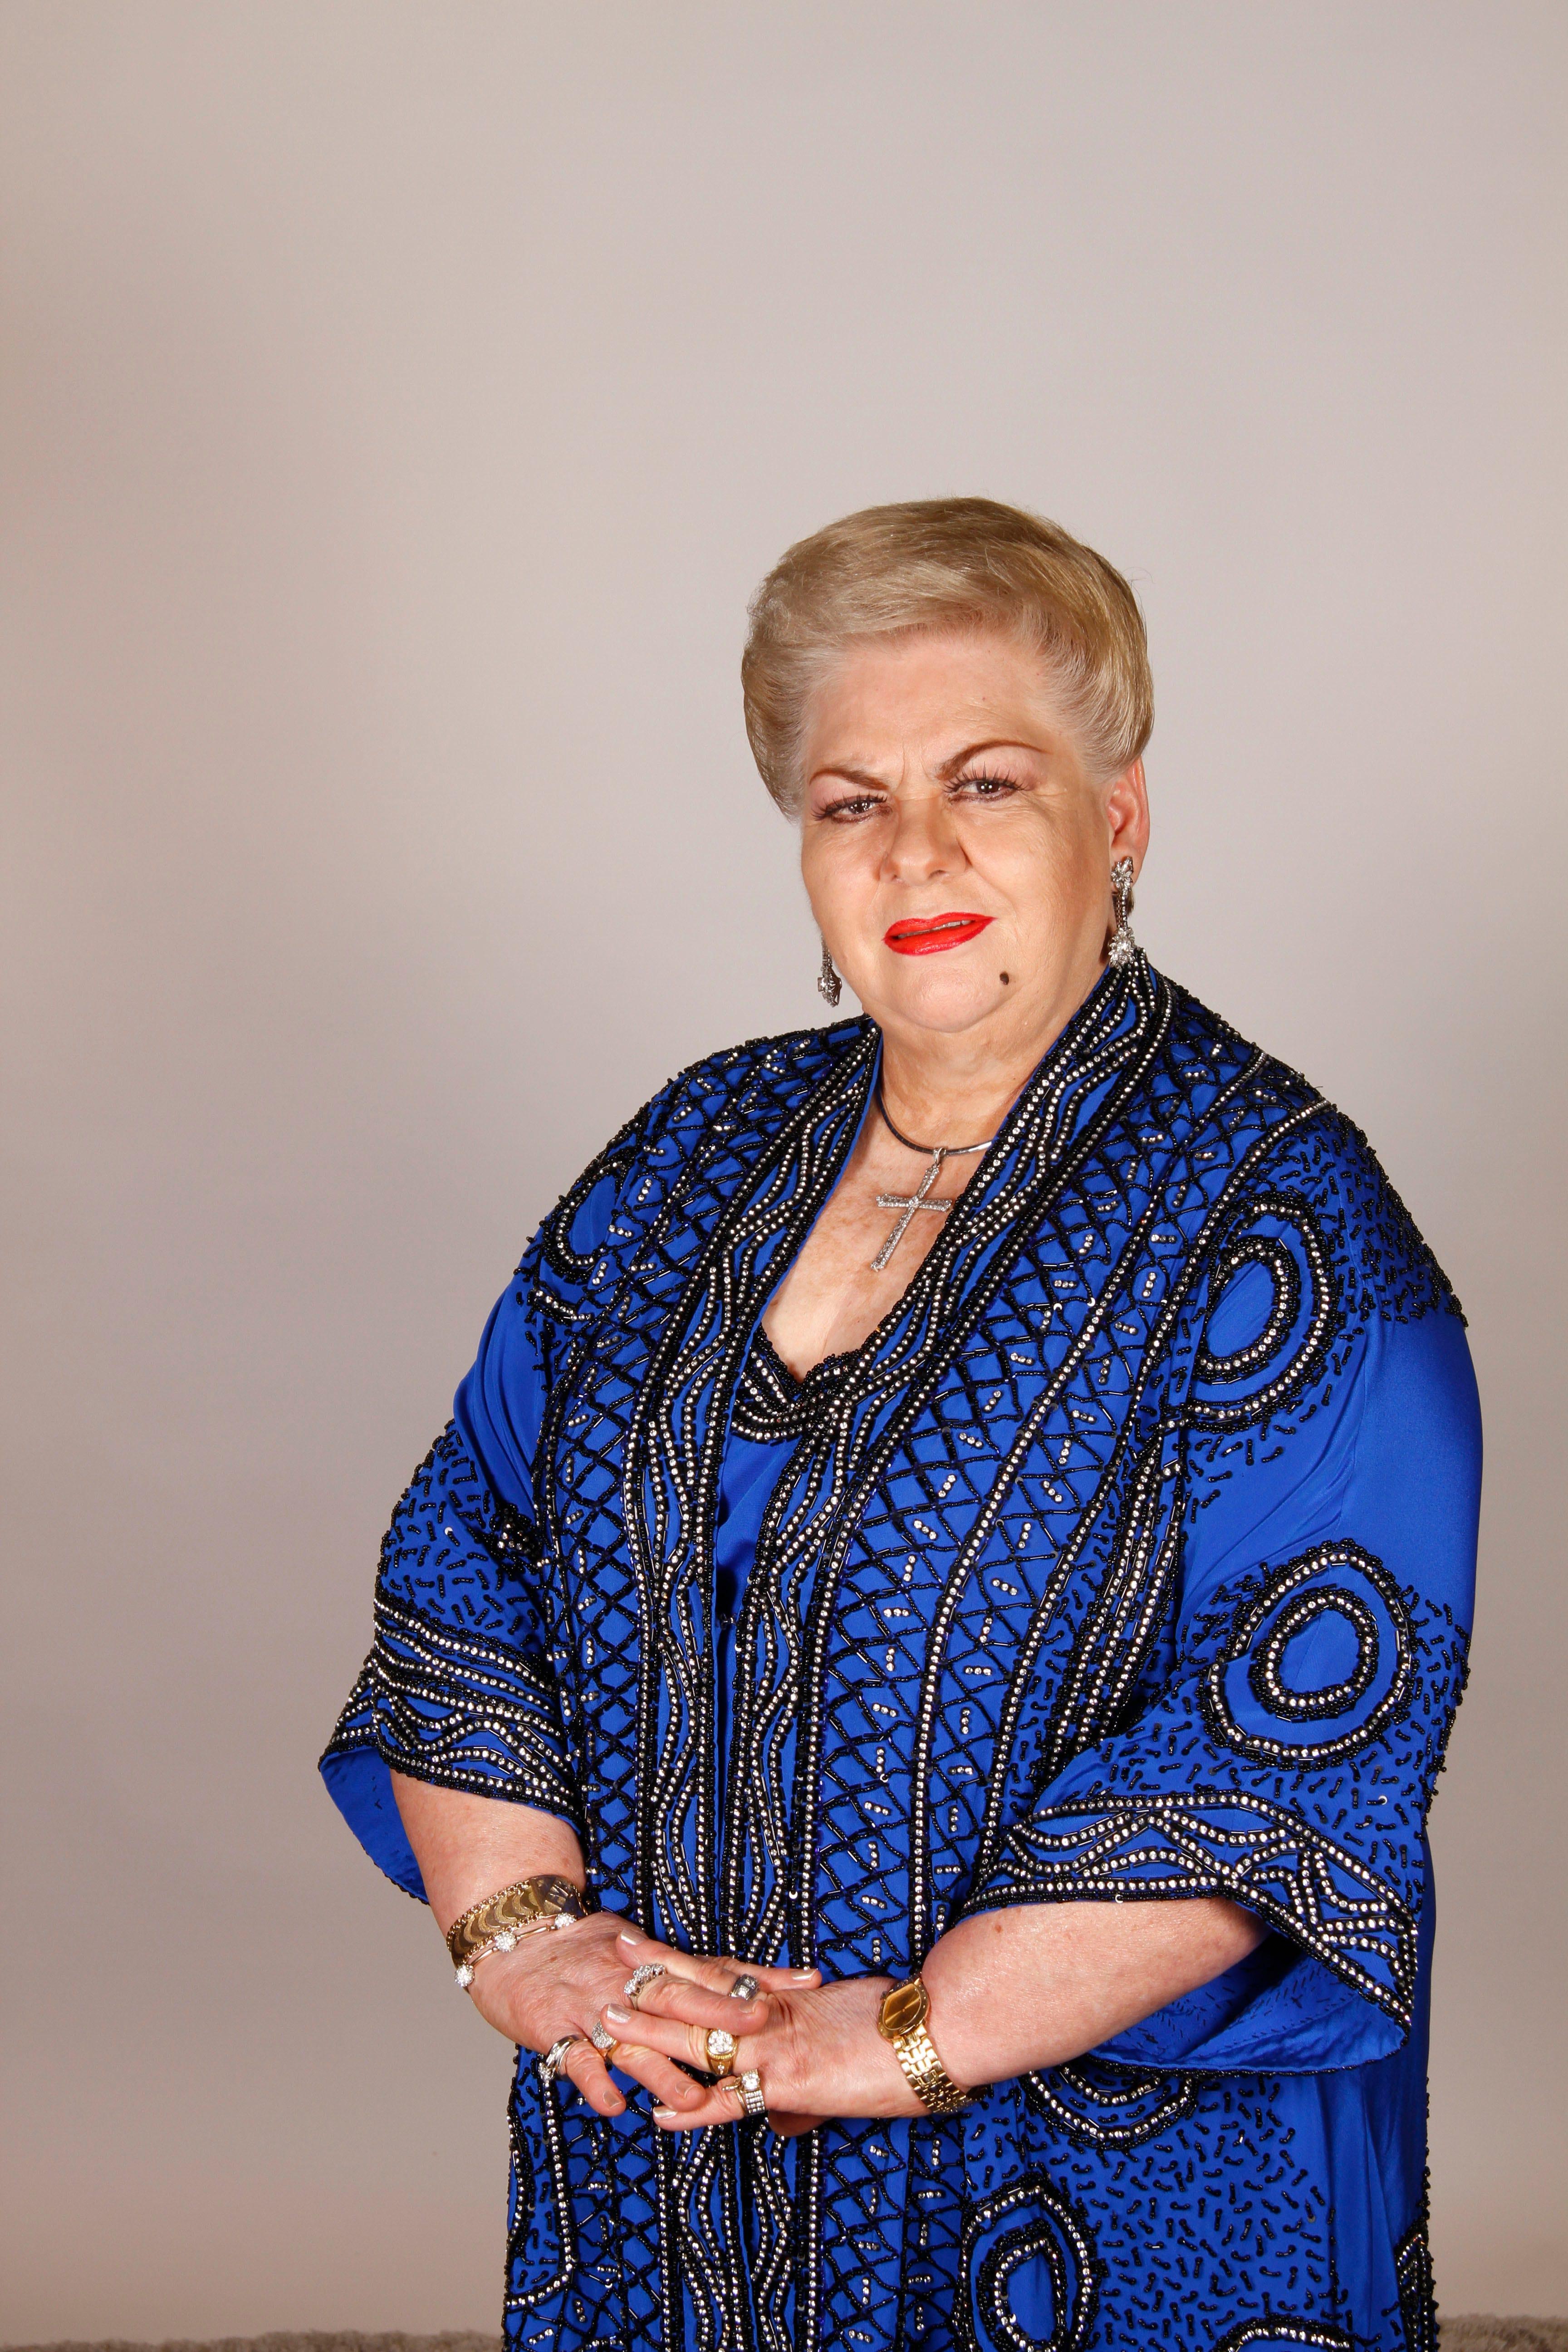 Paquita la del BarrioPaquita, the Grammy-nominated Mexican singer, born Francisca Viveros Barradas, started her career in Mexico City in the